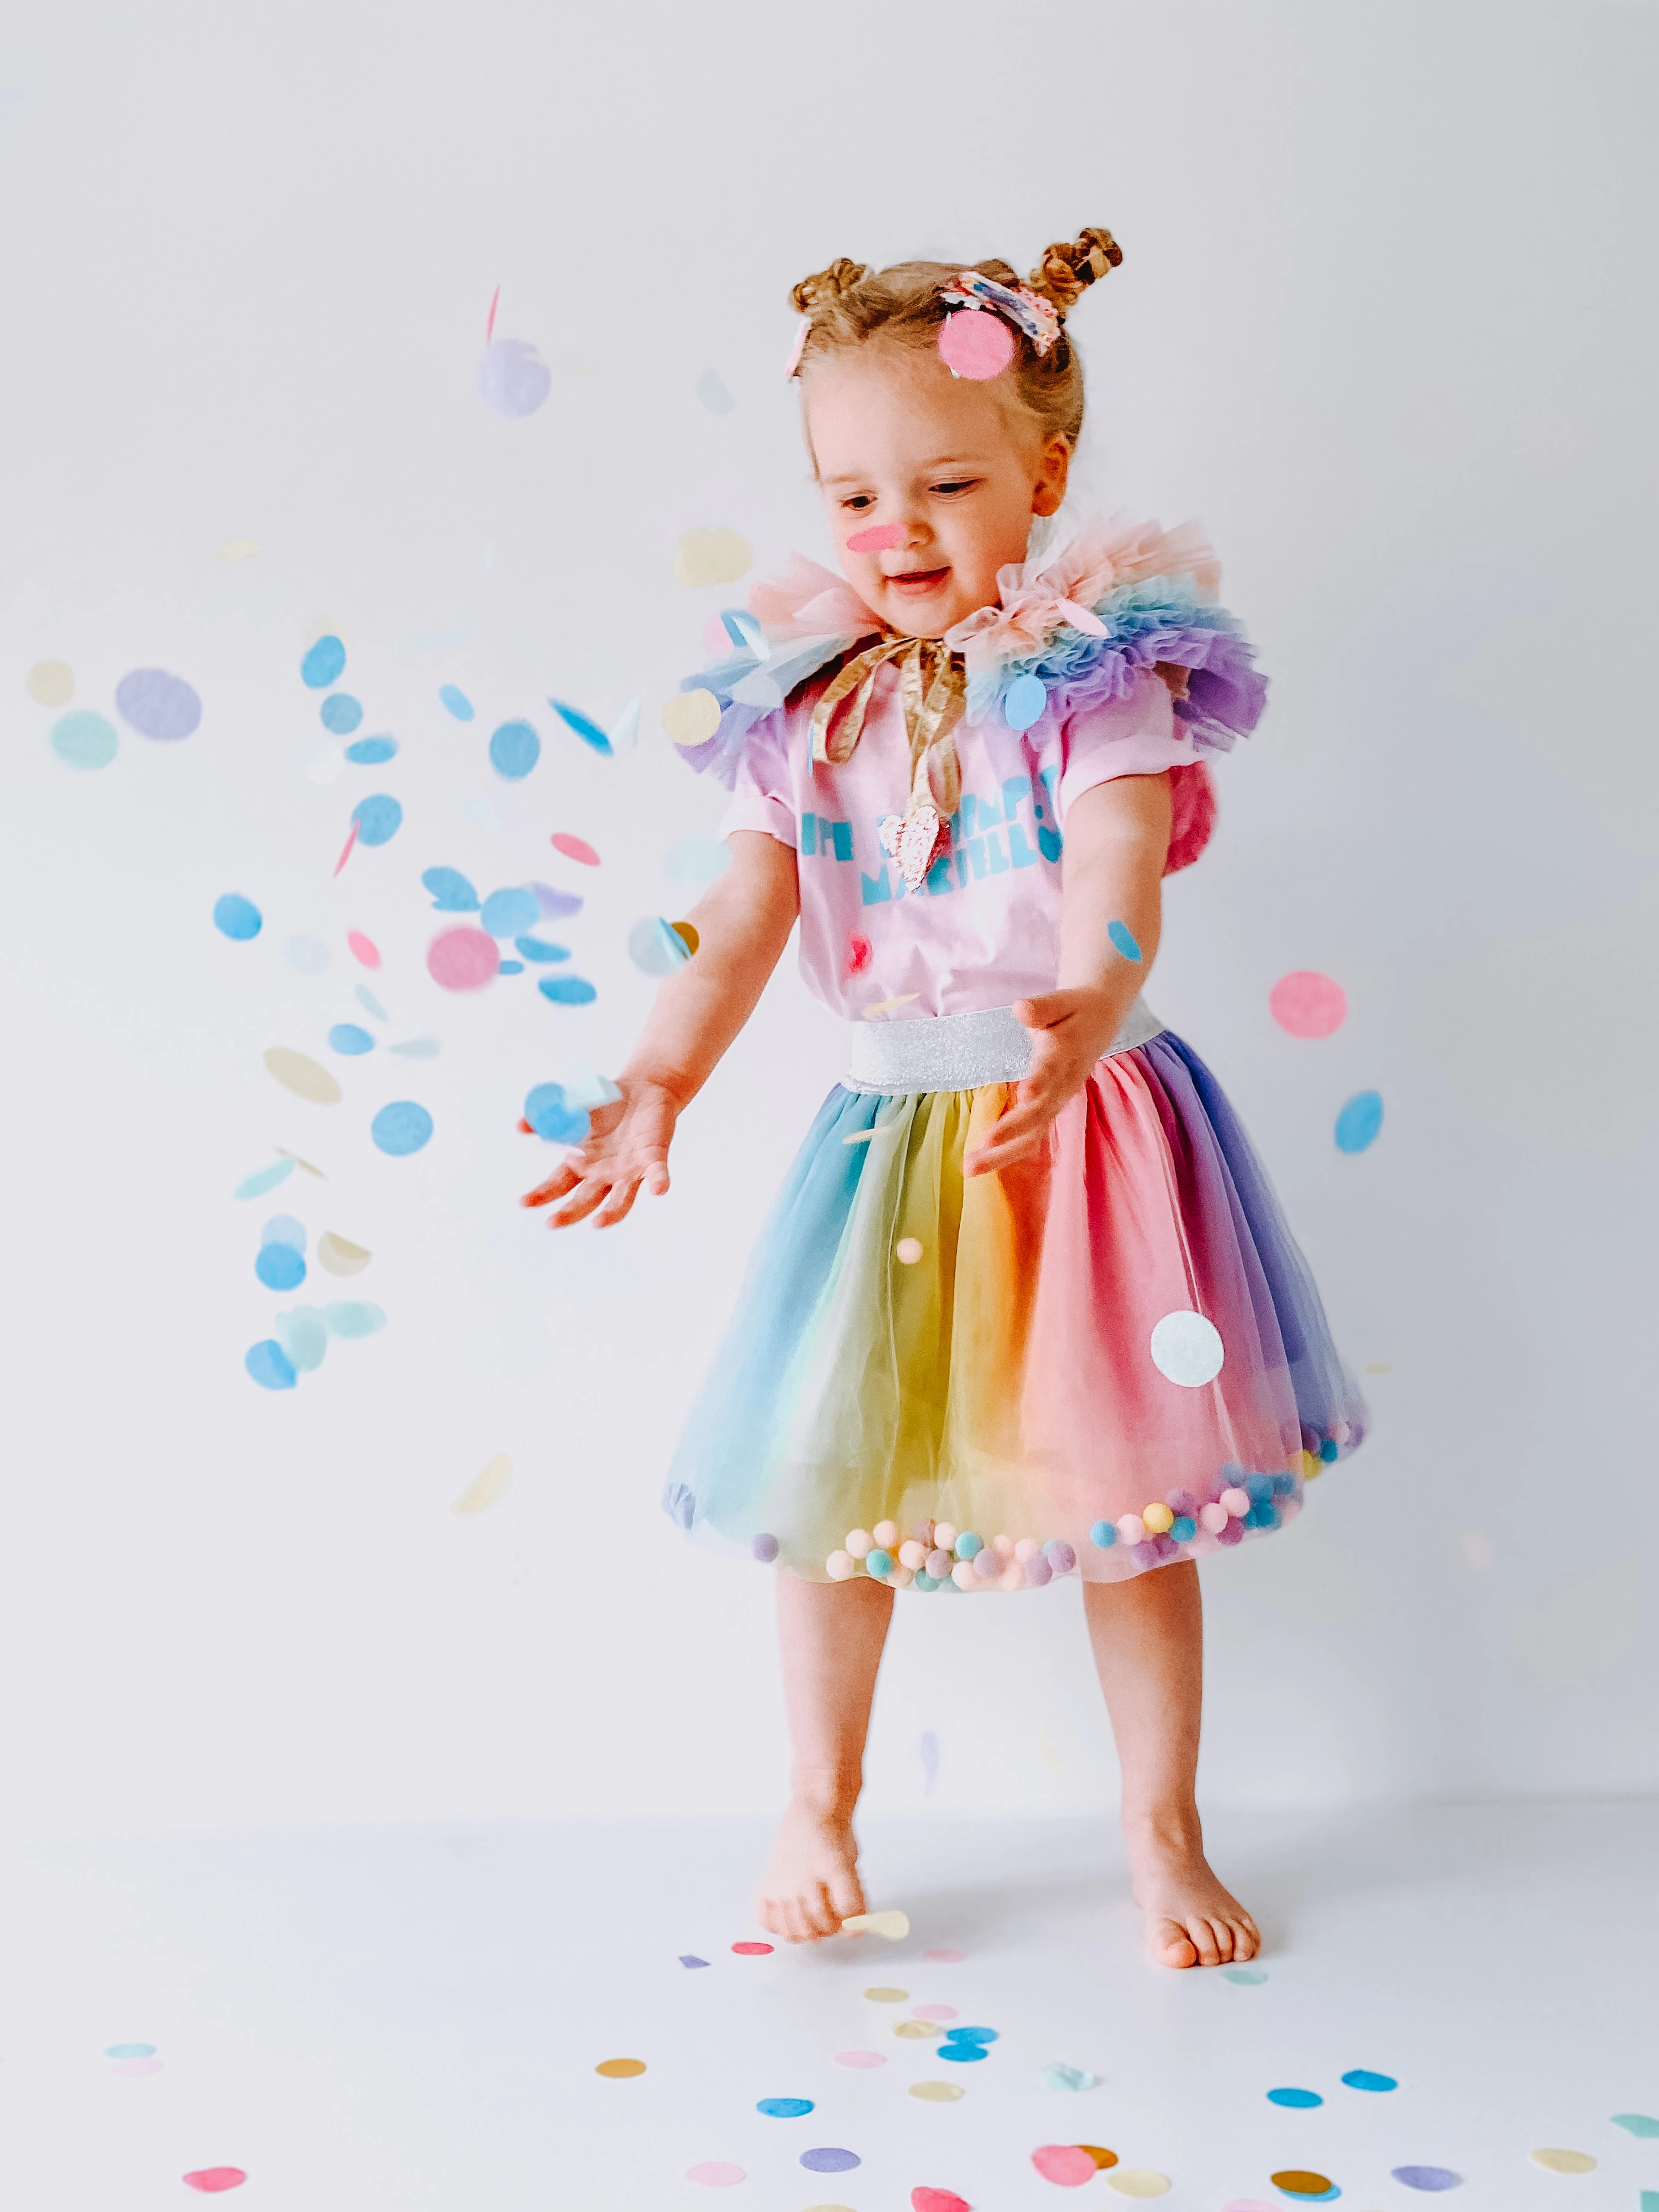 Child wearing a rainbow tutu filled with pom poms throwing confetti